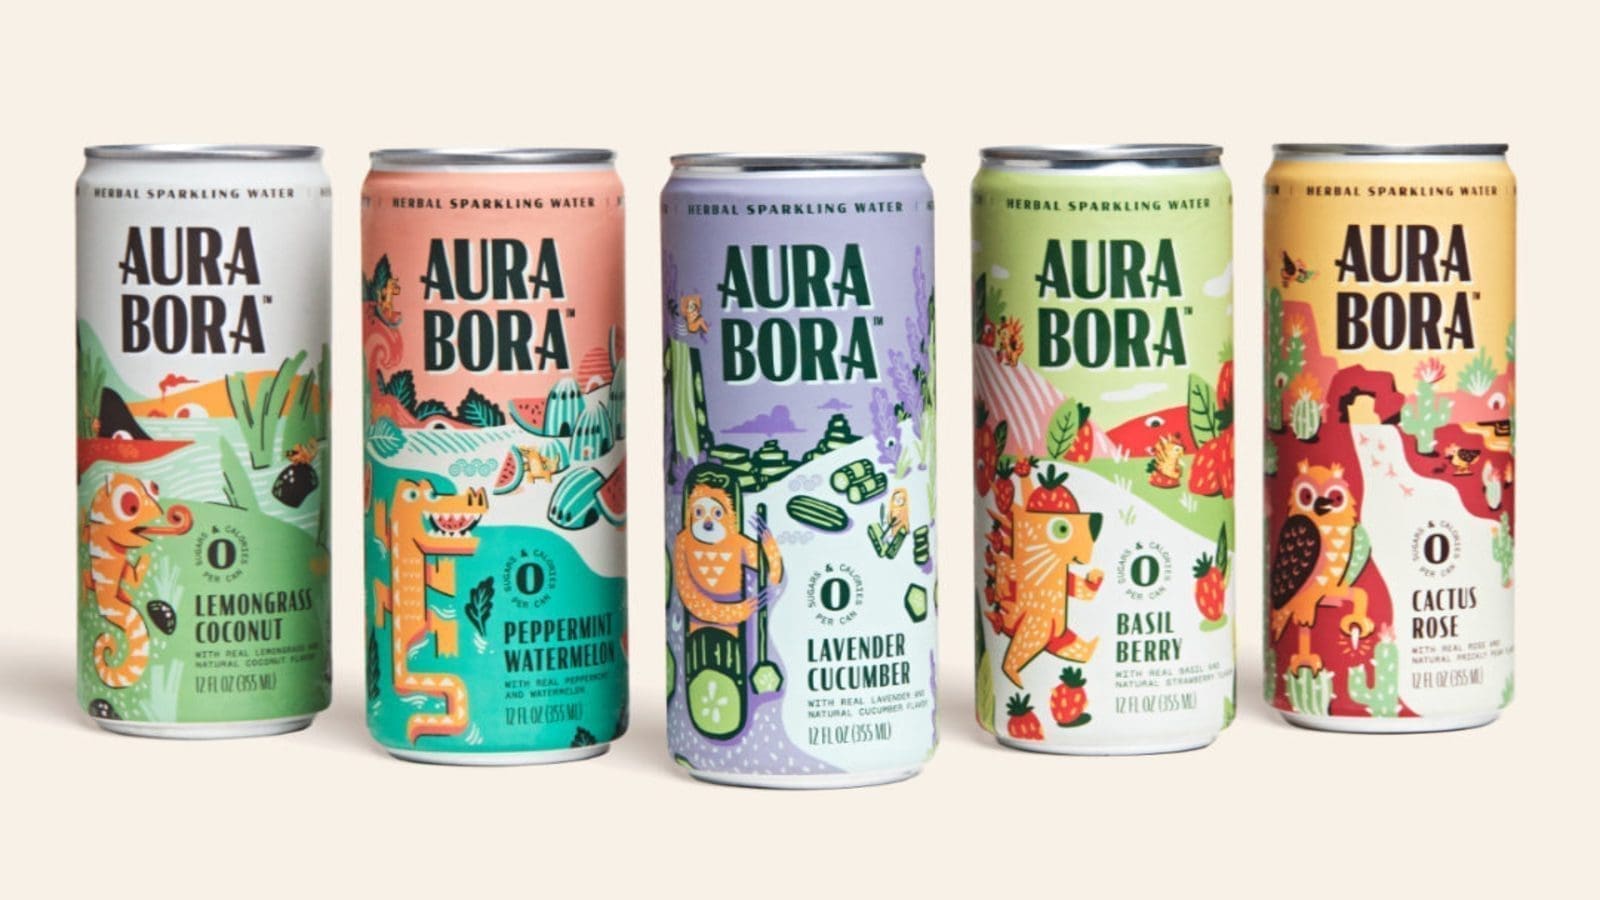 Aura Bora receives funding to facilitate expansion into new markets